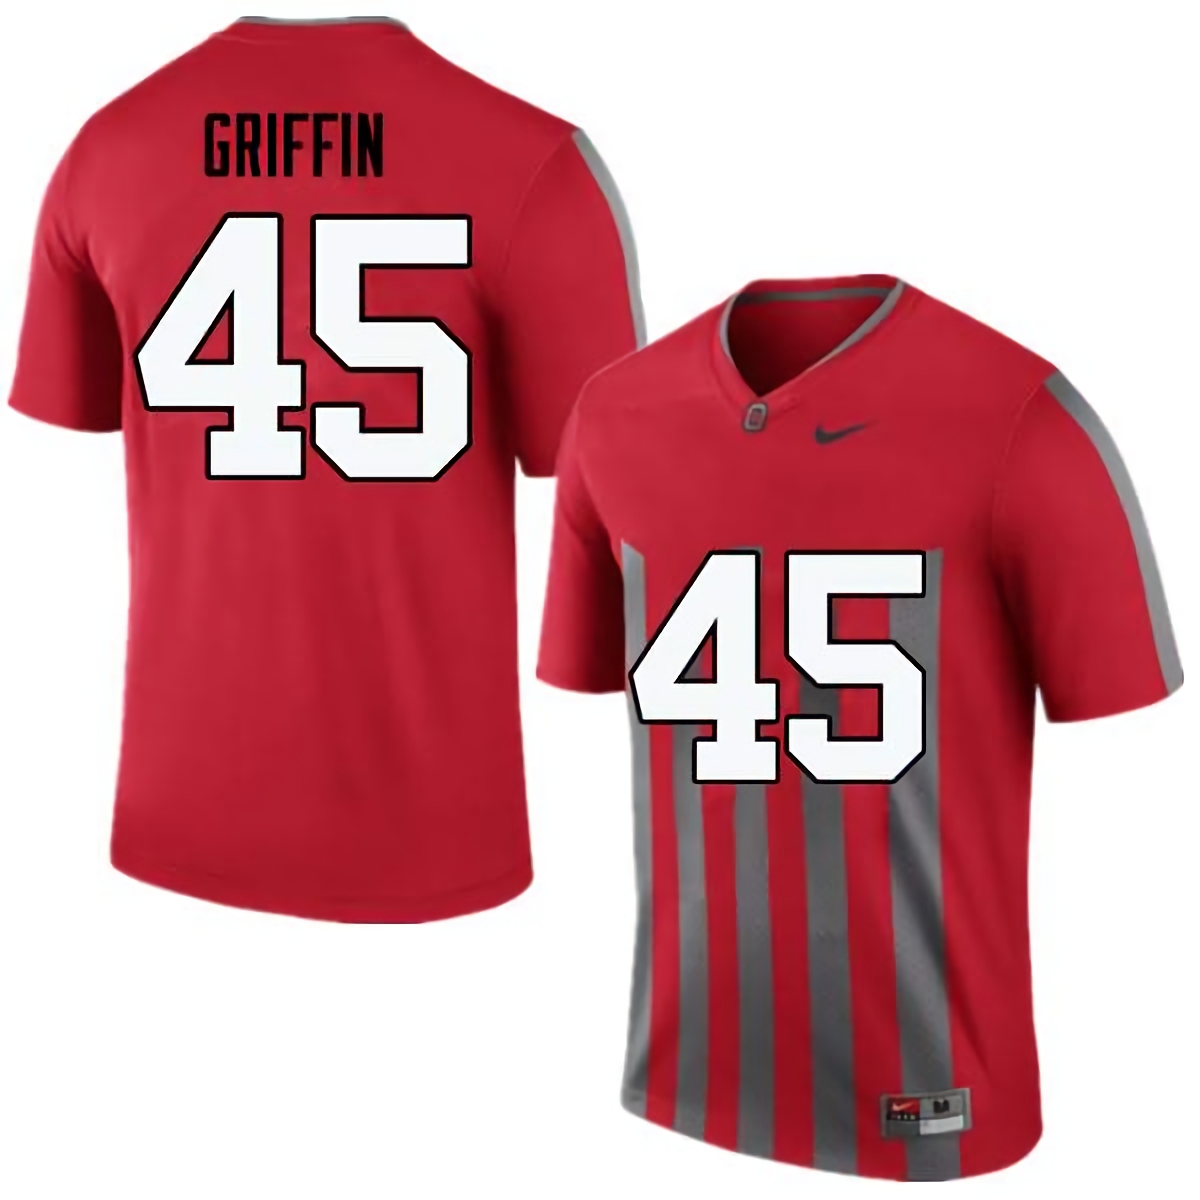 Archie Griffin Ohio State Buckeyes Men's NCAA #45 Nike Throwback Red College Stitched Football Jersey UFB5156CX